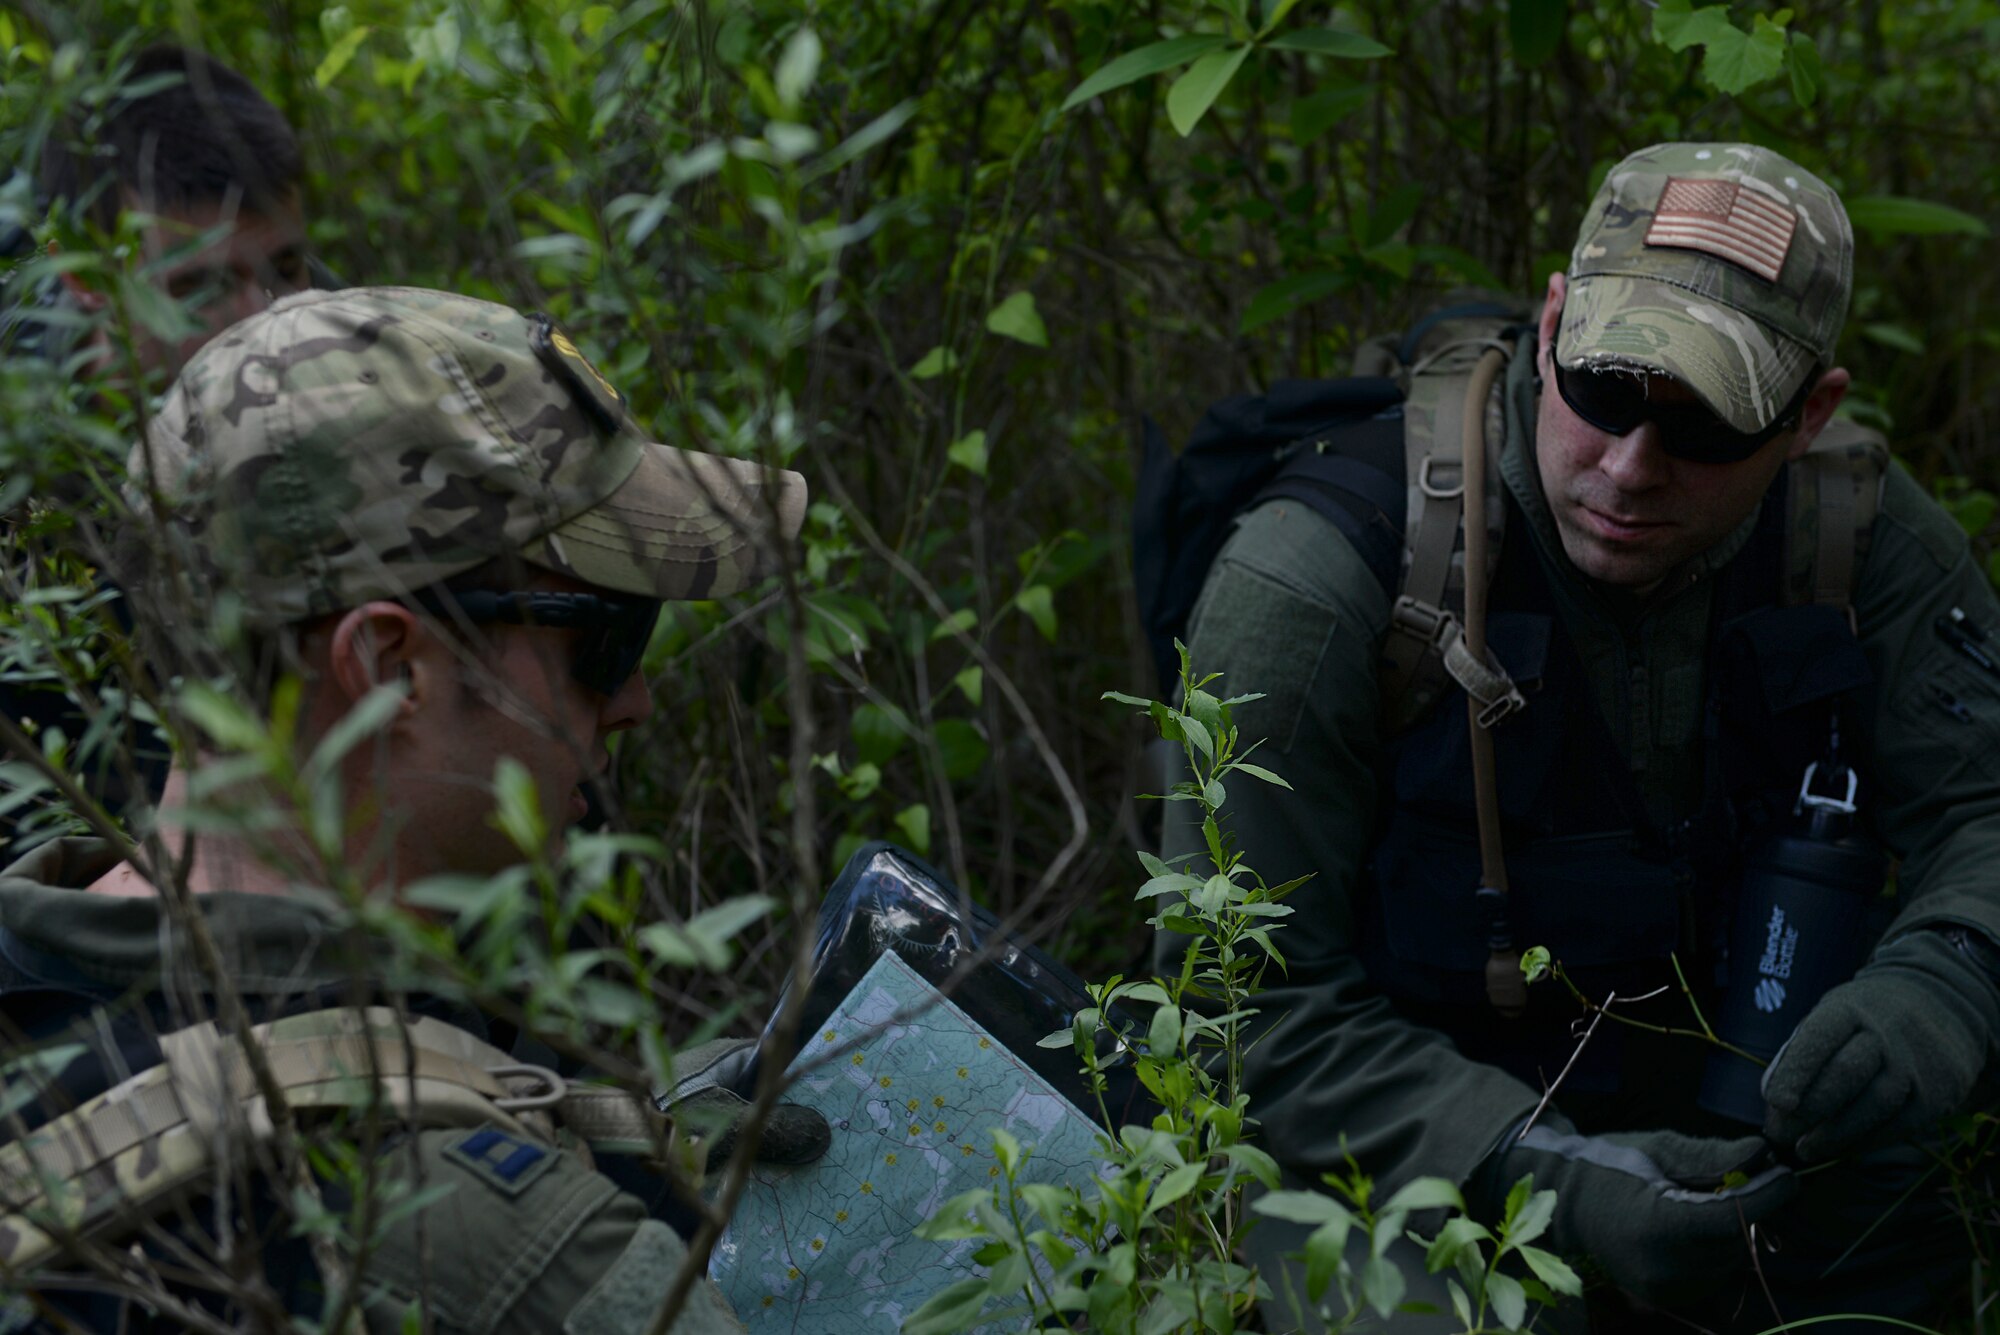 From left, U.S. Air Force Capt. Jon Clausen, 61st Airlift Squadron C-130J pilot, and U.S. Air Force Staff Sgt. Matthew Morgridge, 61st Airlift Squadron C-130J loadmaster, review a topographic map April 22, 2016, near Ft. Polk, La. Clausen and Morgridge, along with other aircrew members, used various methods without any radio transmission to be recovered during Green Flag 16-06. (U.S. Air Force photo by Airman 1st Class Mercedes Taylor) 